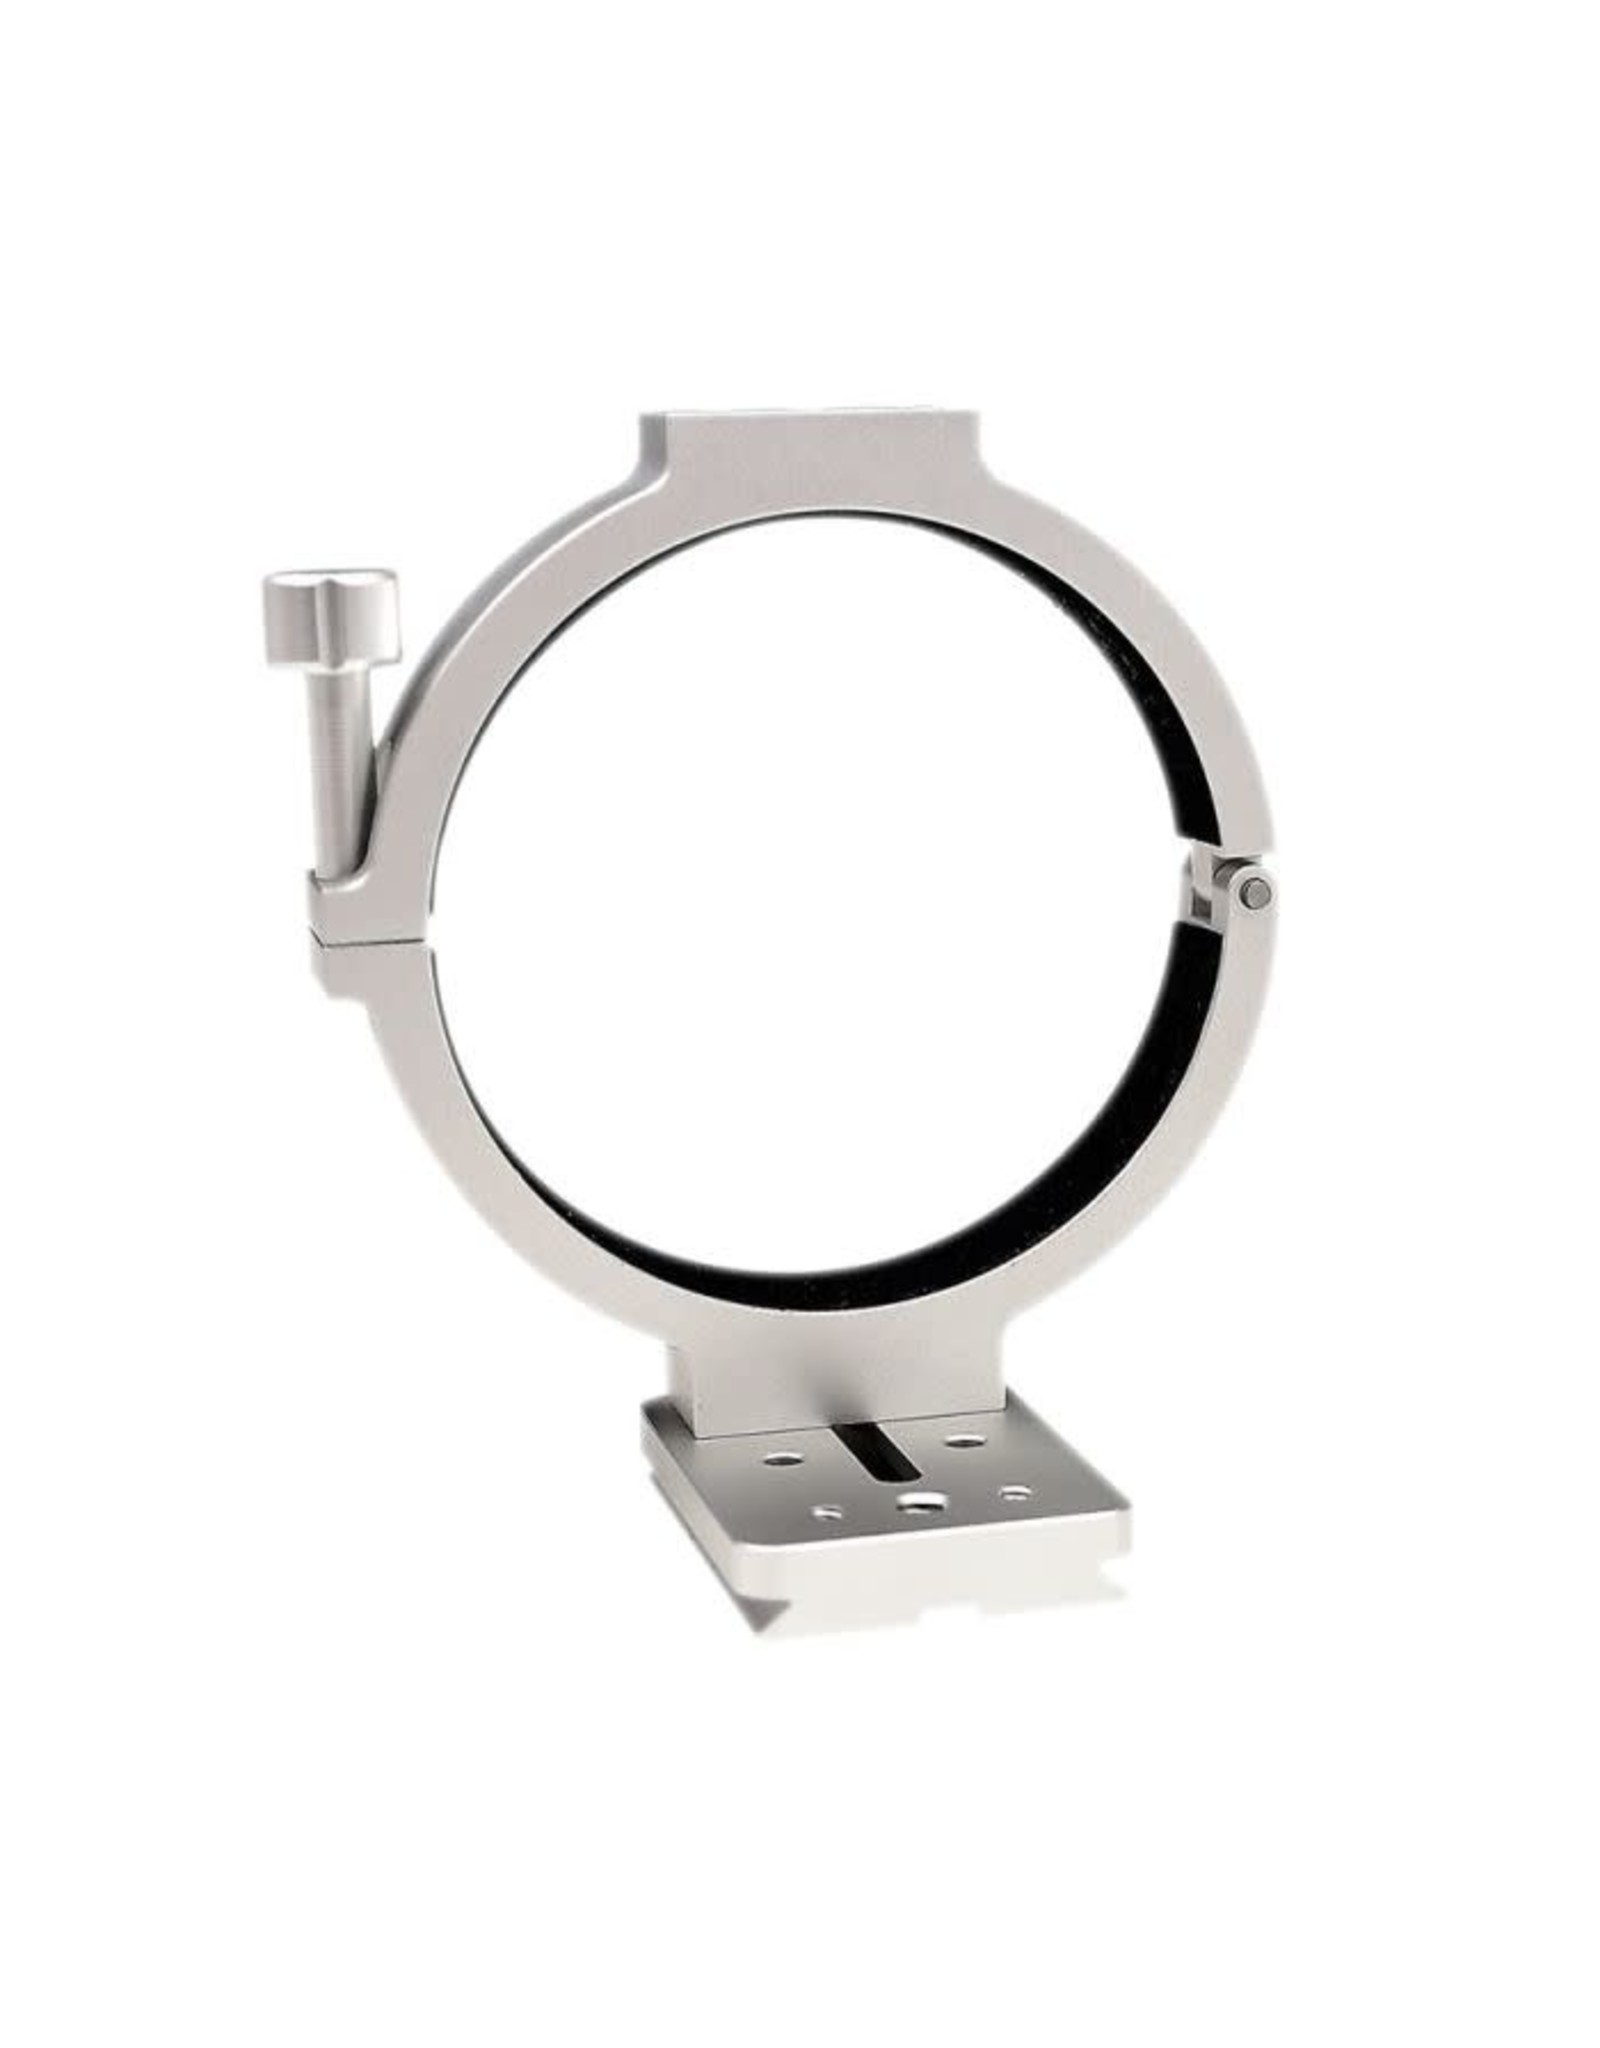 ZWO ZWO Holder Ring for ASI Cooled Cameras - 78mm ID - NEWRINGD78